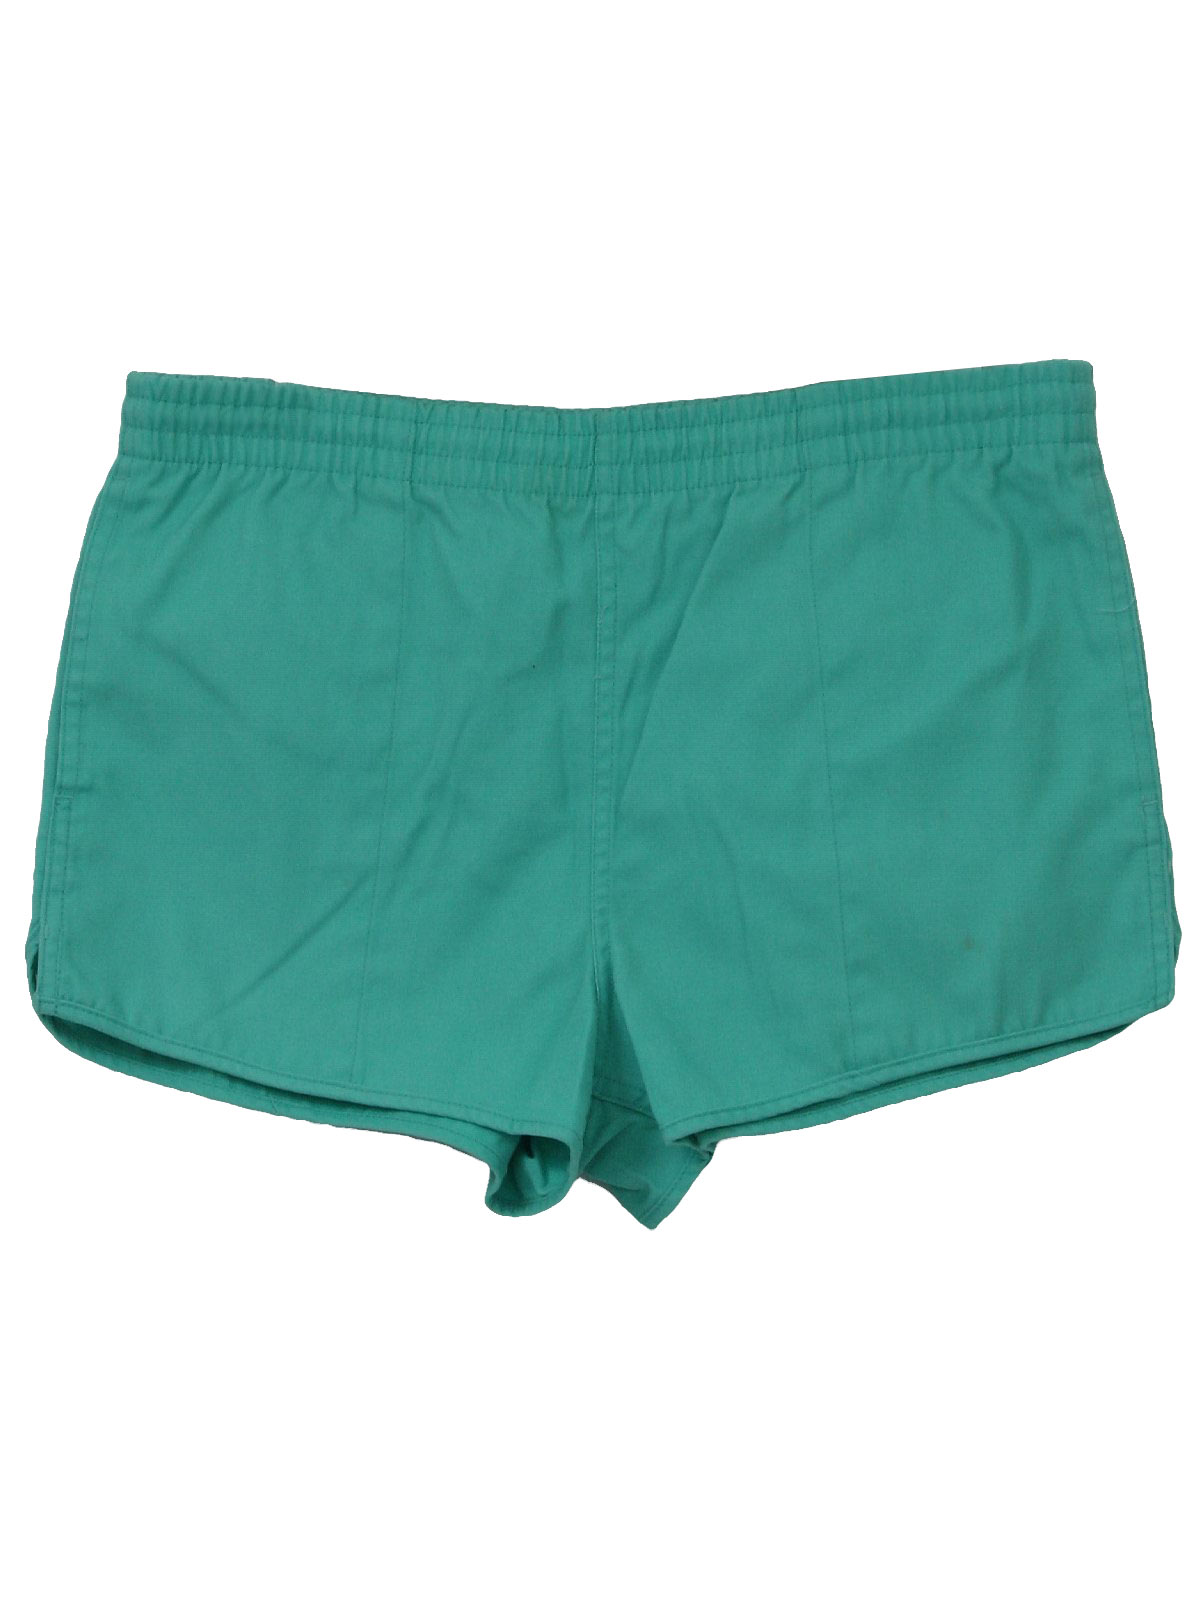 Vintage 1990's Shorts: early 90s -Woolrich- Mens light easter green ...